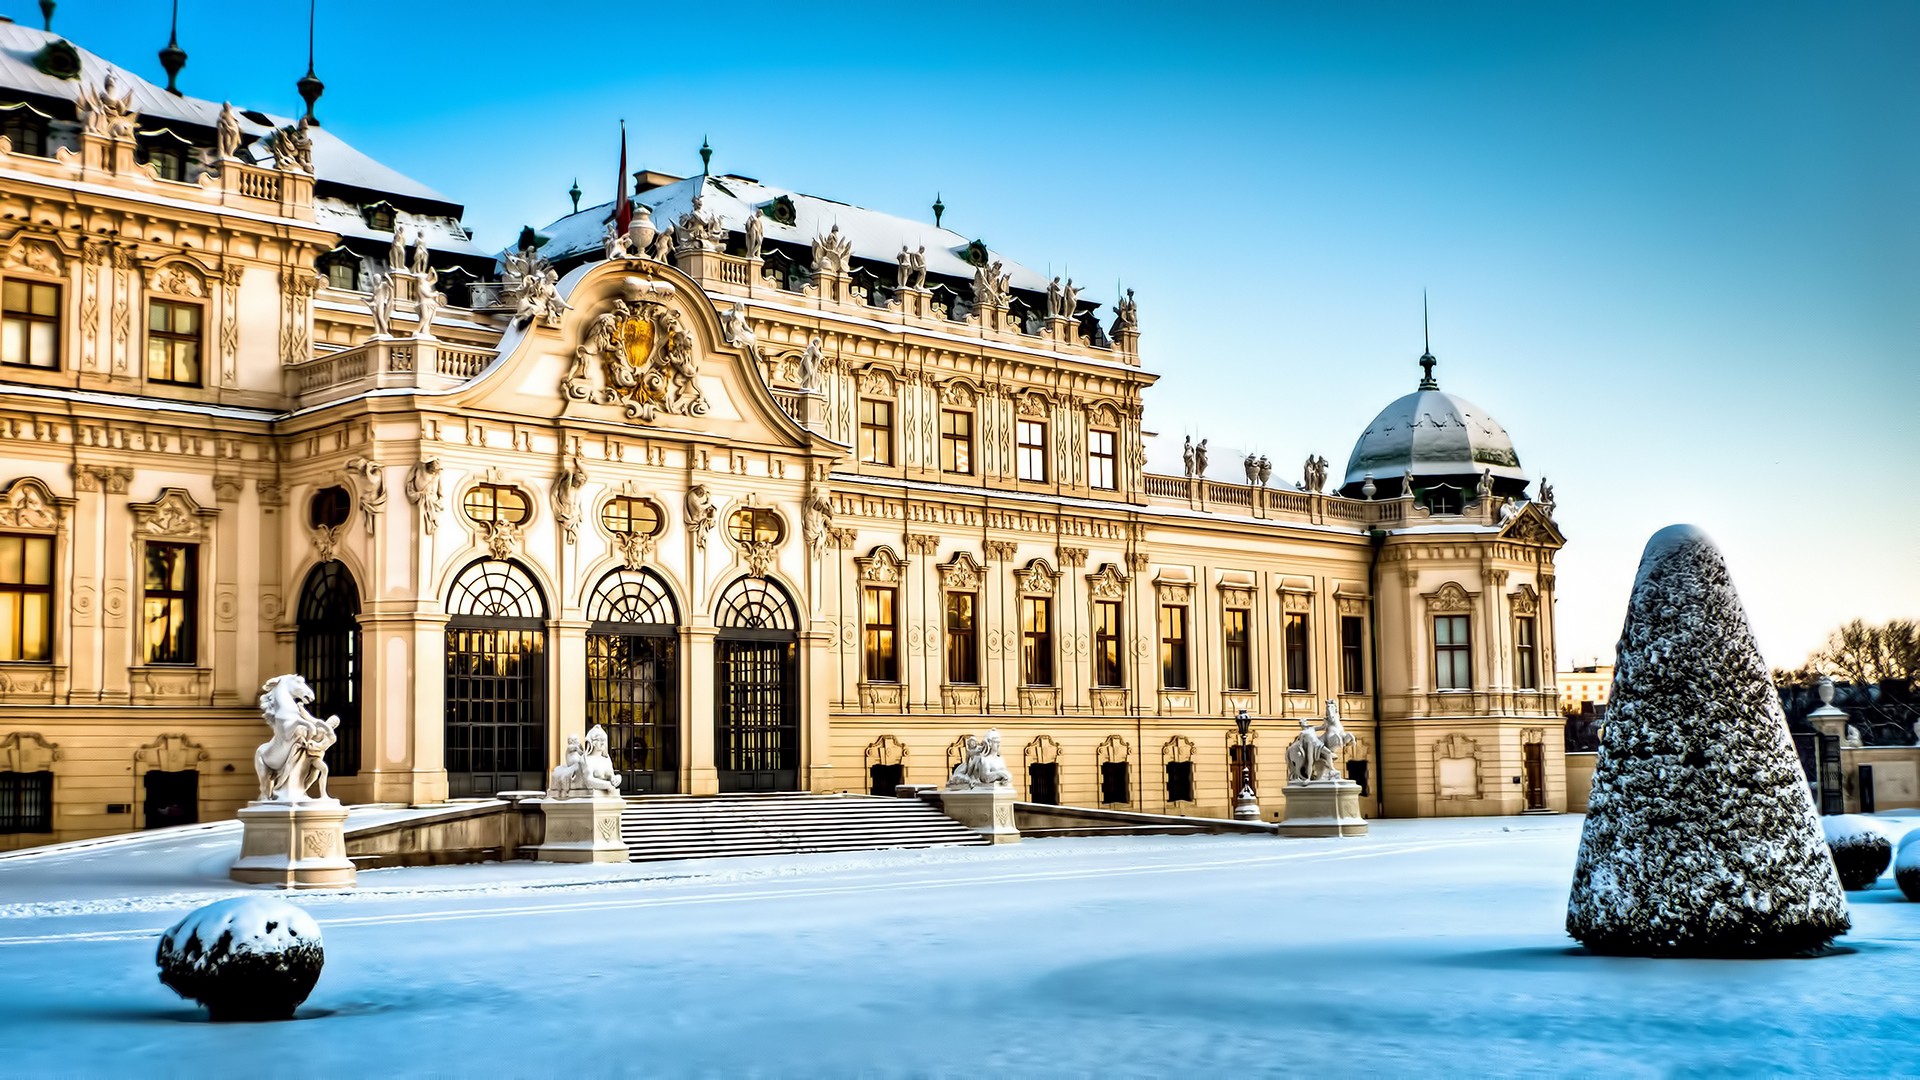 Winter Building Palace Museum Vienna Vibrant Old Building Snow 1920x1080